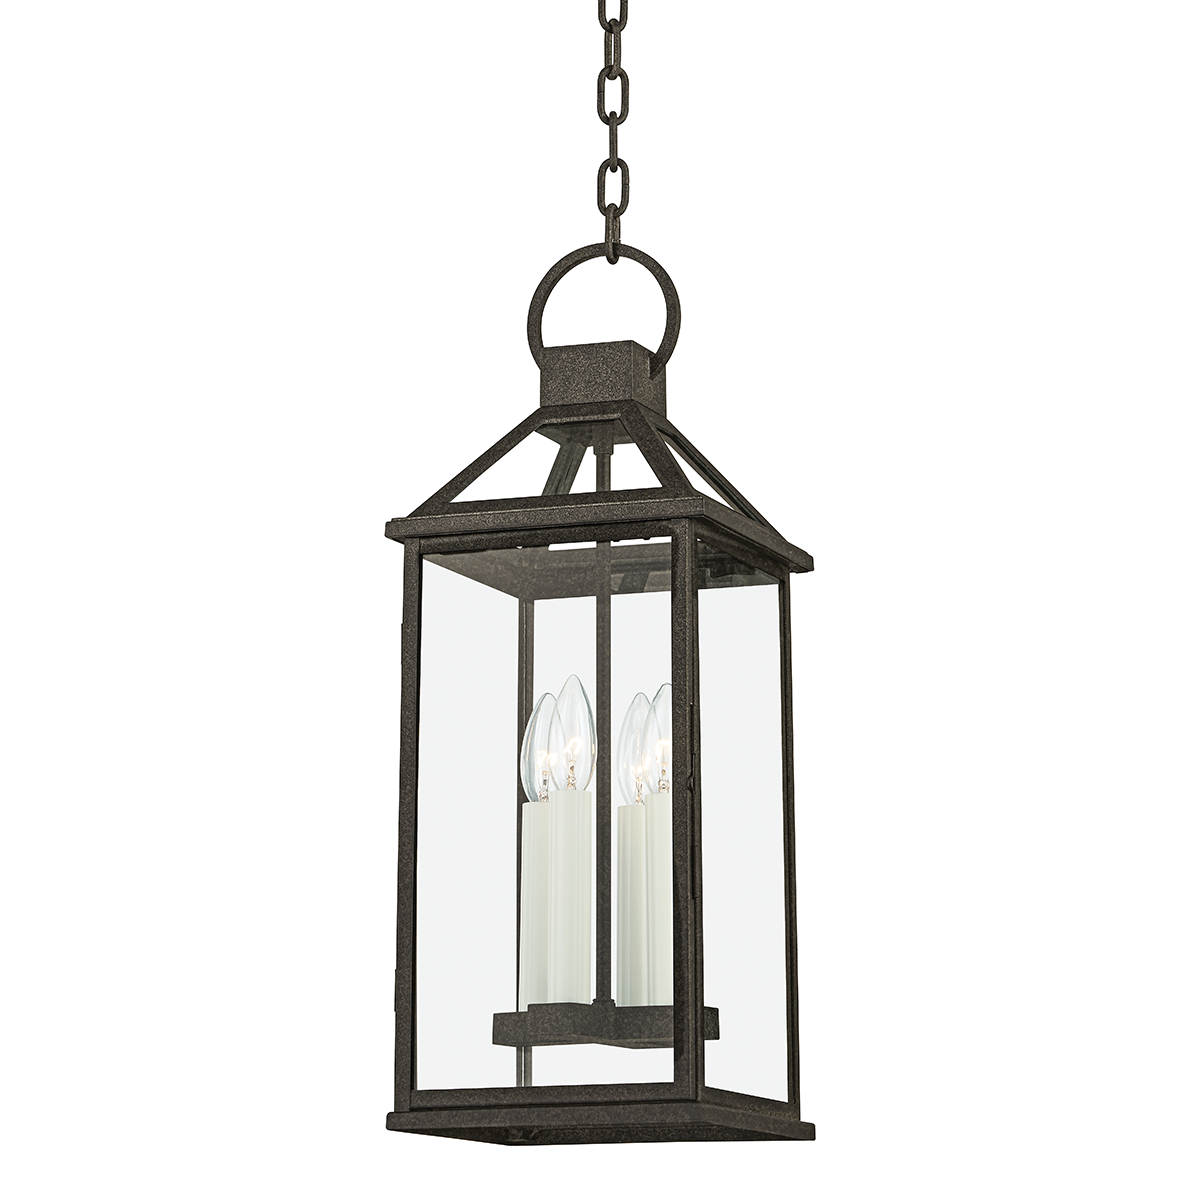 Troy SANDERS 4 LIGHT LARGE EXTERIOR LANTERN F2749 Outdoor l Wall Troy Lighting FRENCH IRON  